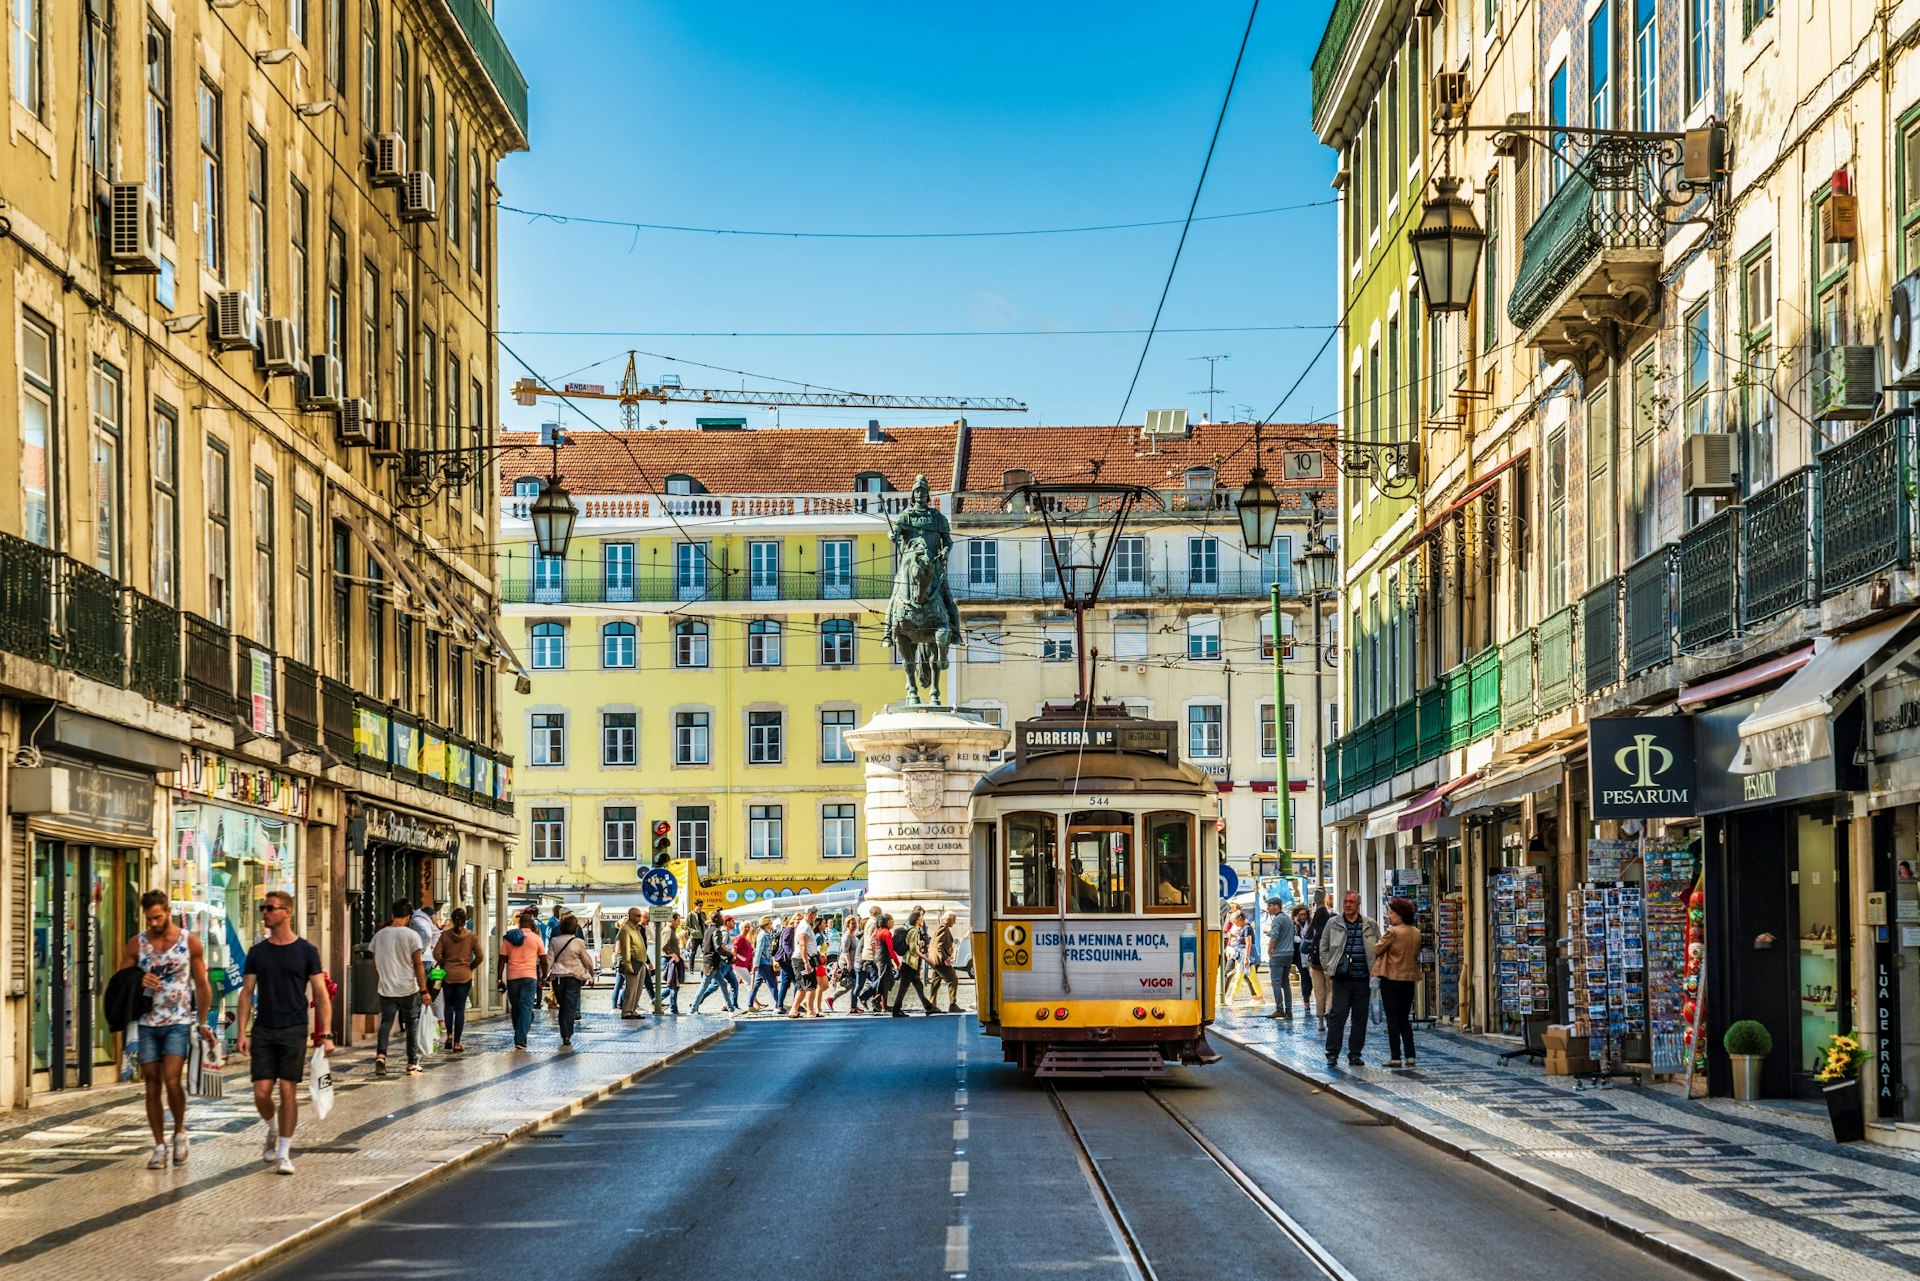 A yellow tram is travelling down a busy shopping street in Lisbon, Portugal, on a sunny day.